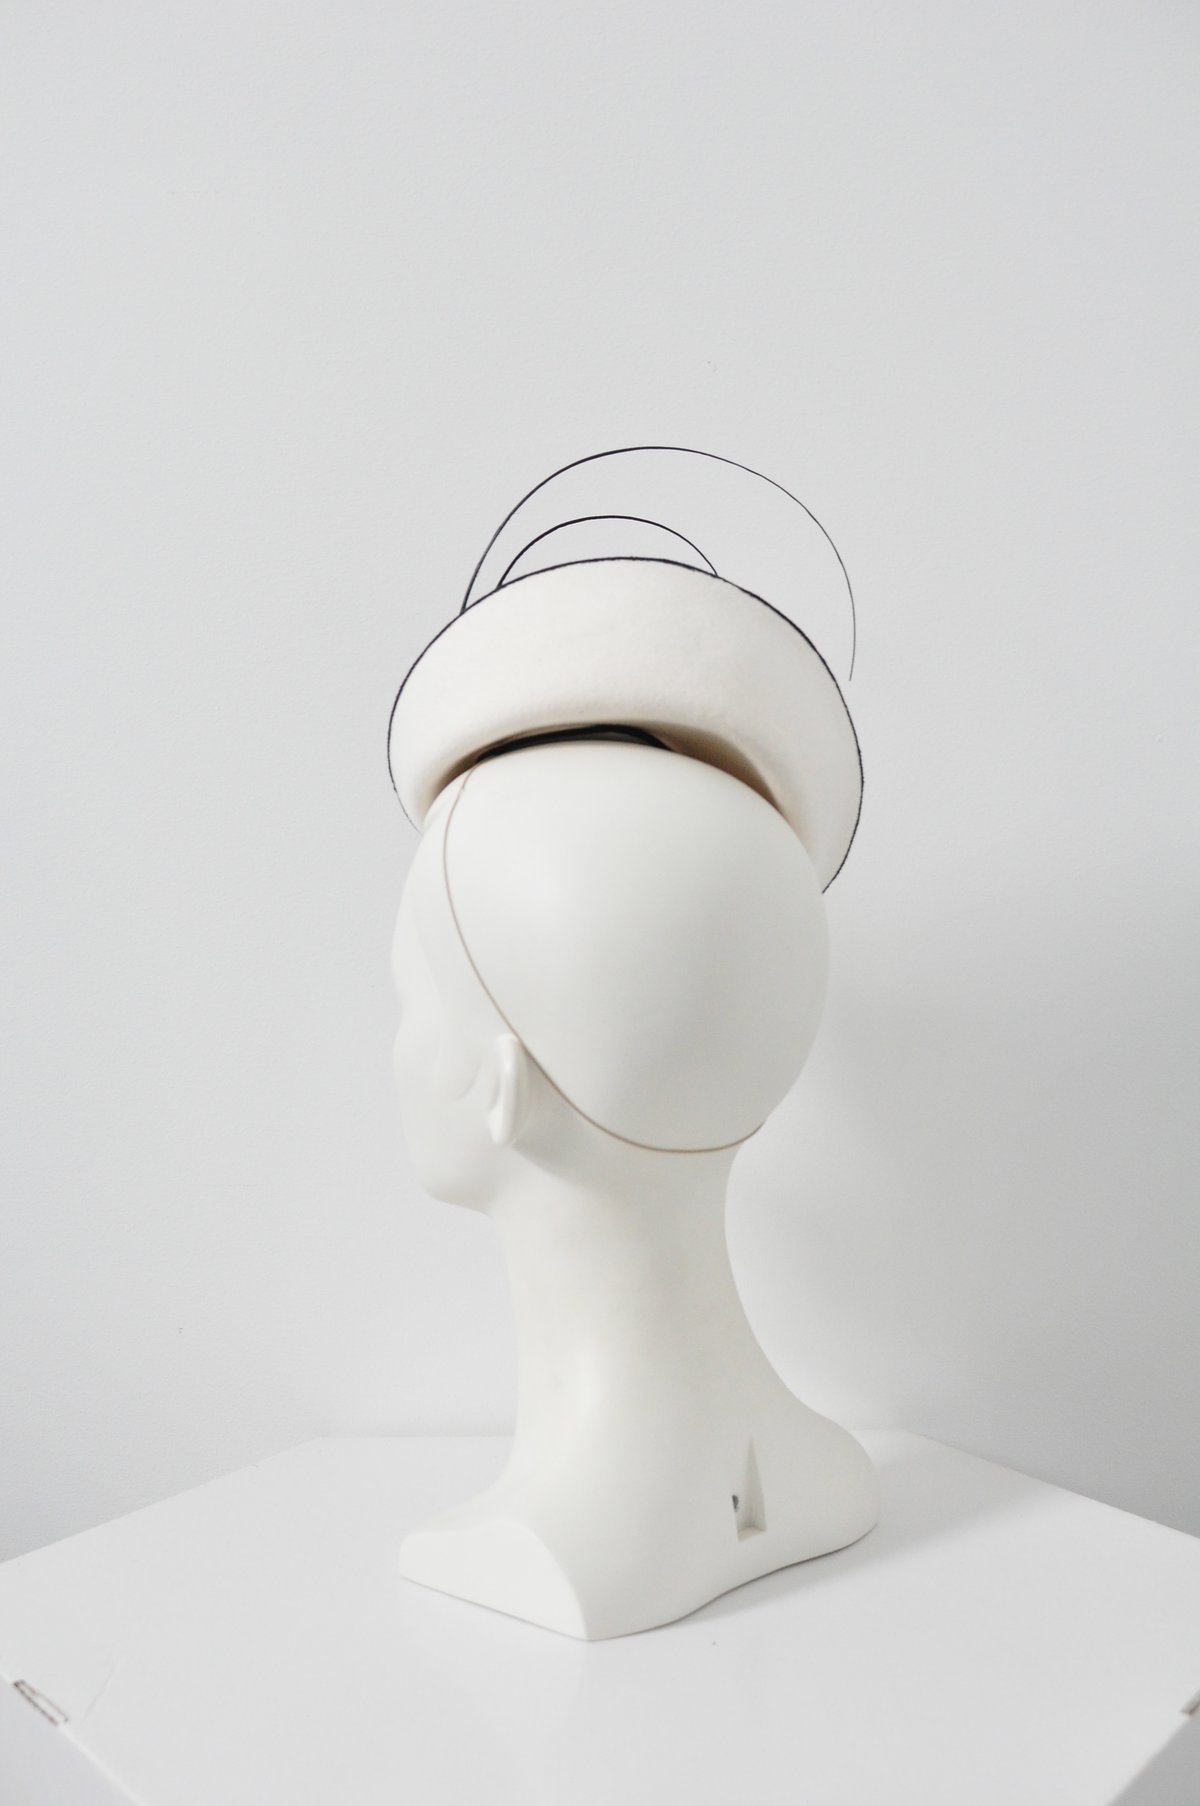 Image of felt headpiece with quills